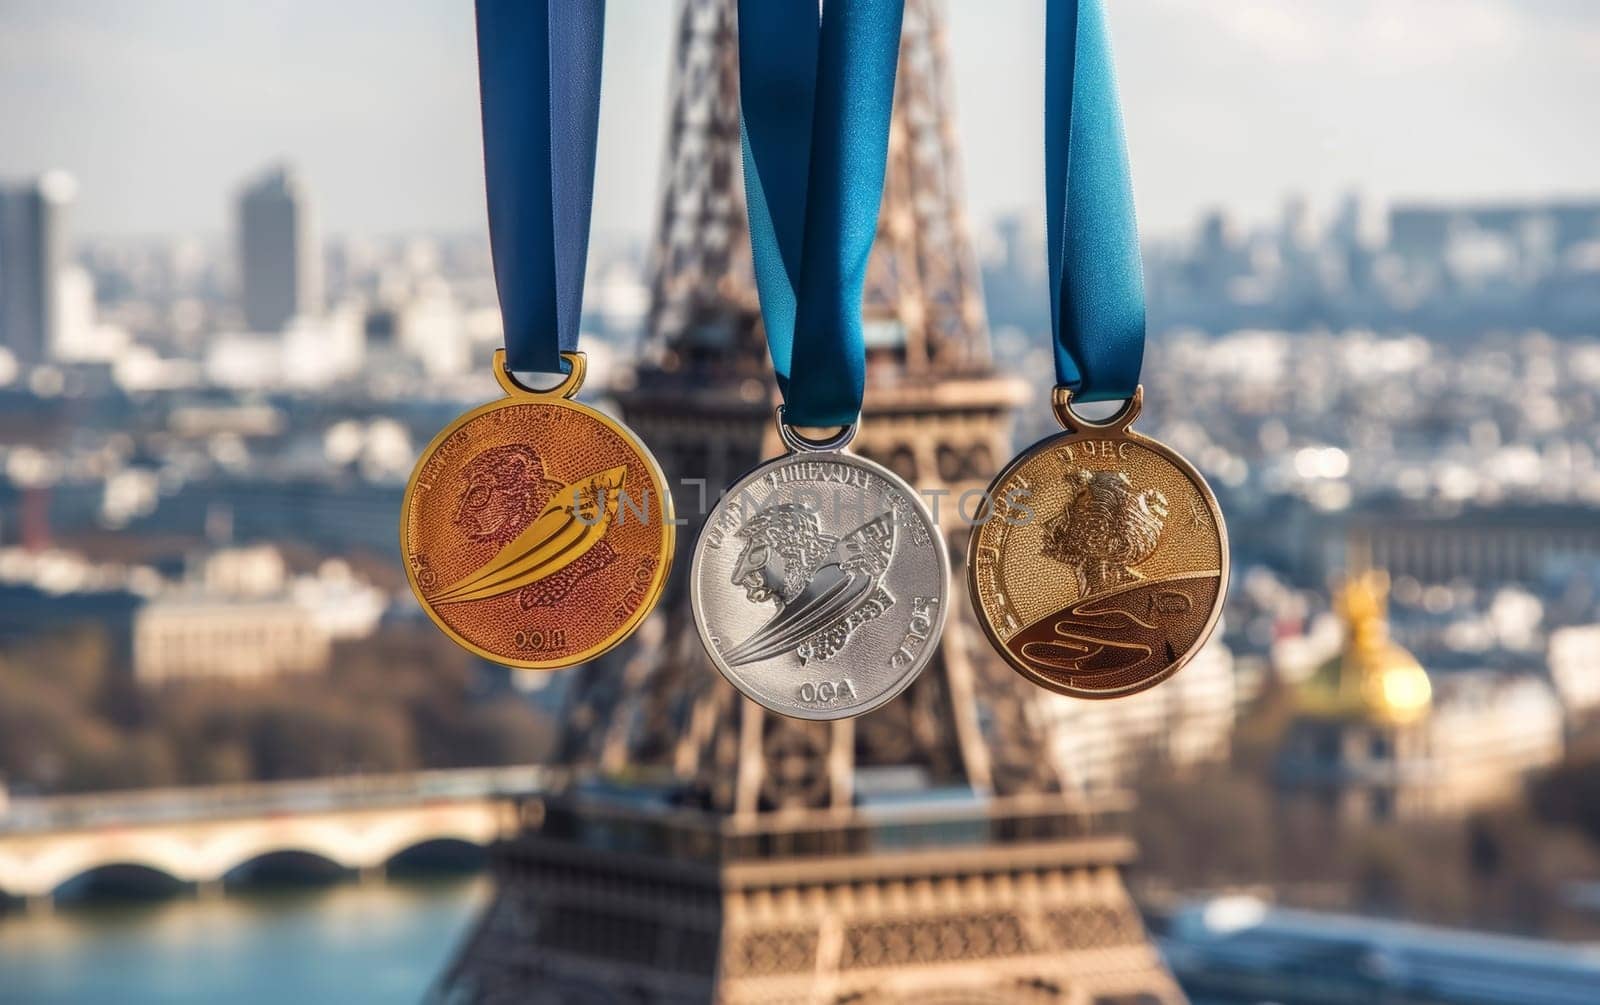 A sharp image of the Paris skyline featuring the Eiffel Tower with a trio of golden medals in the foreground